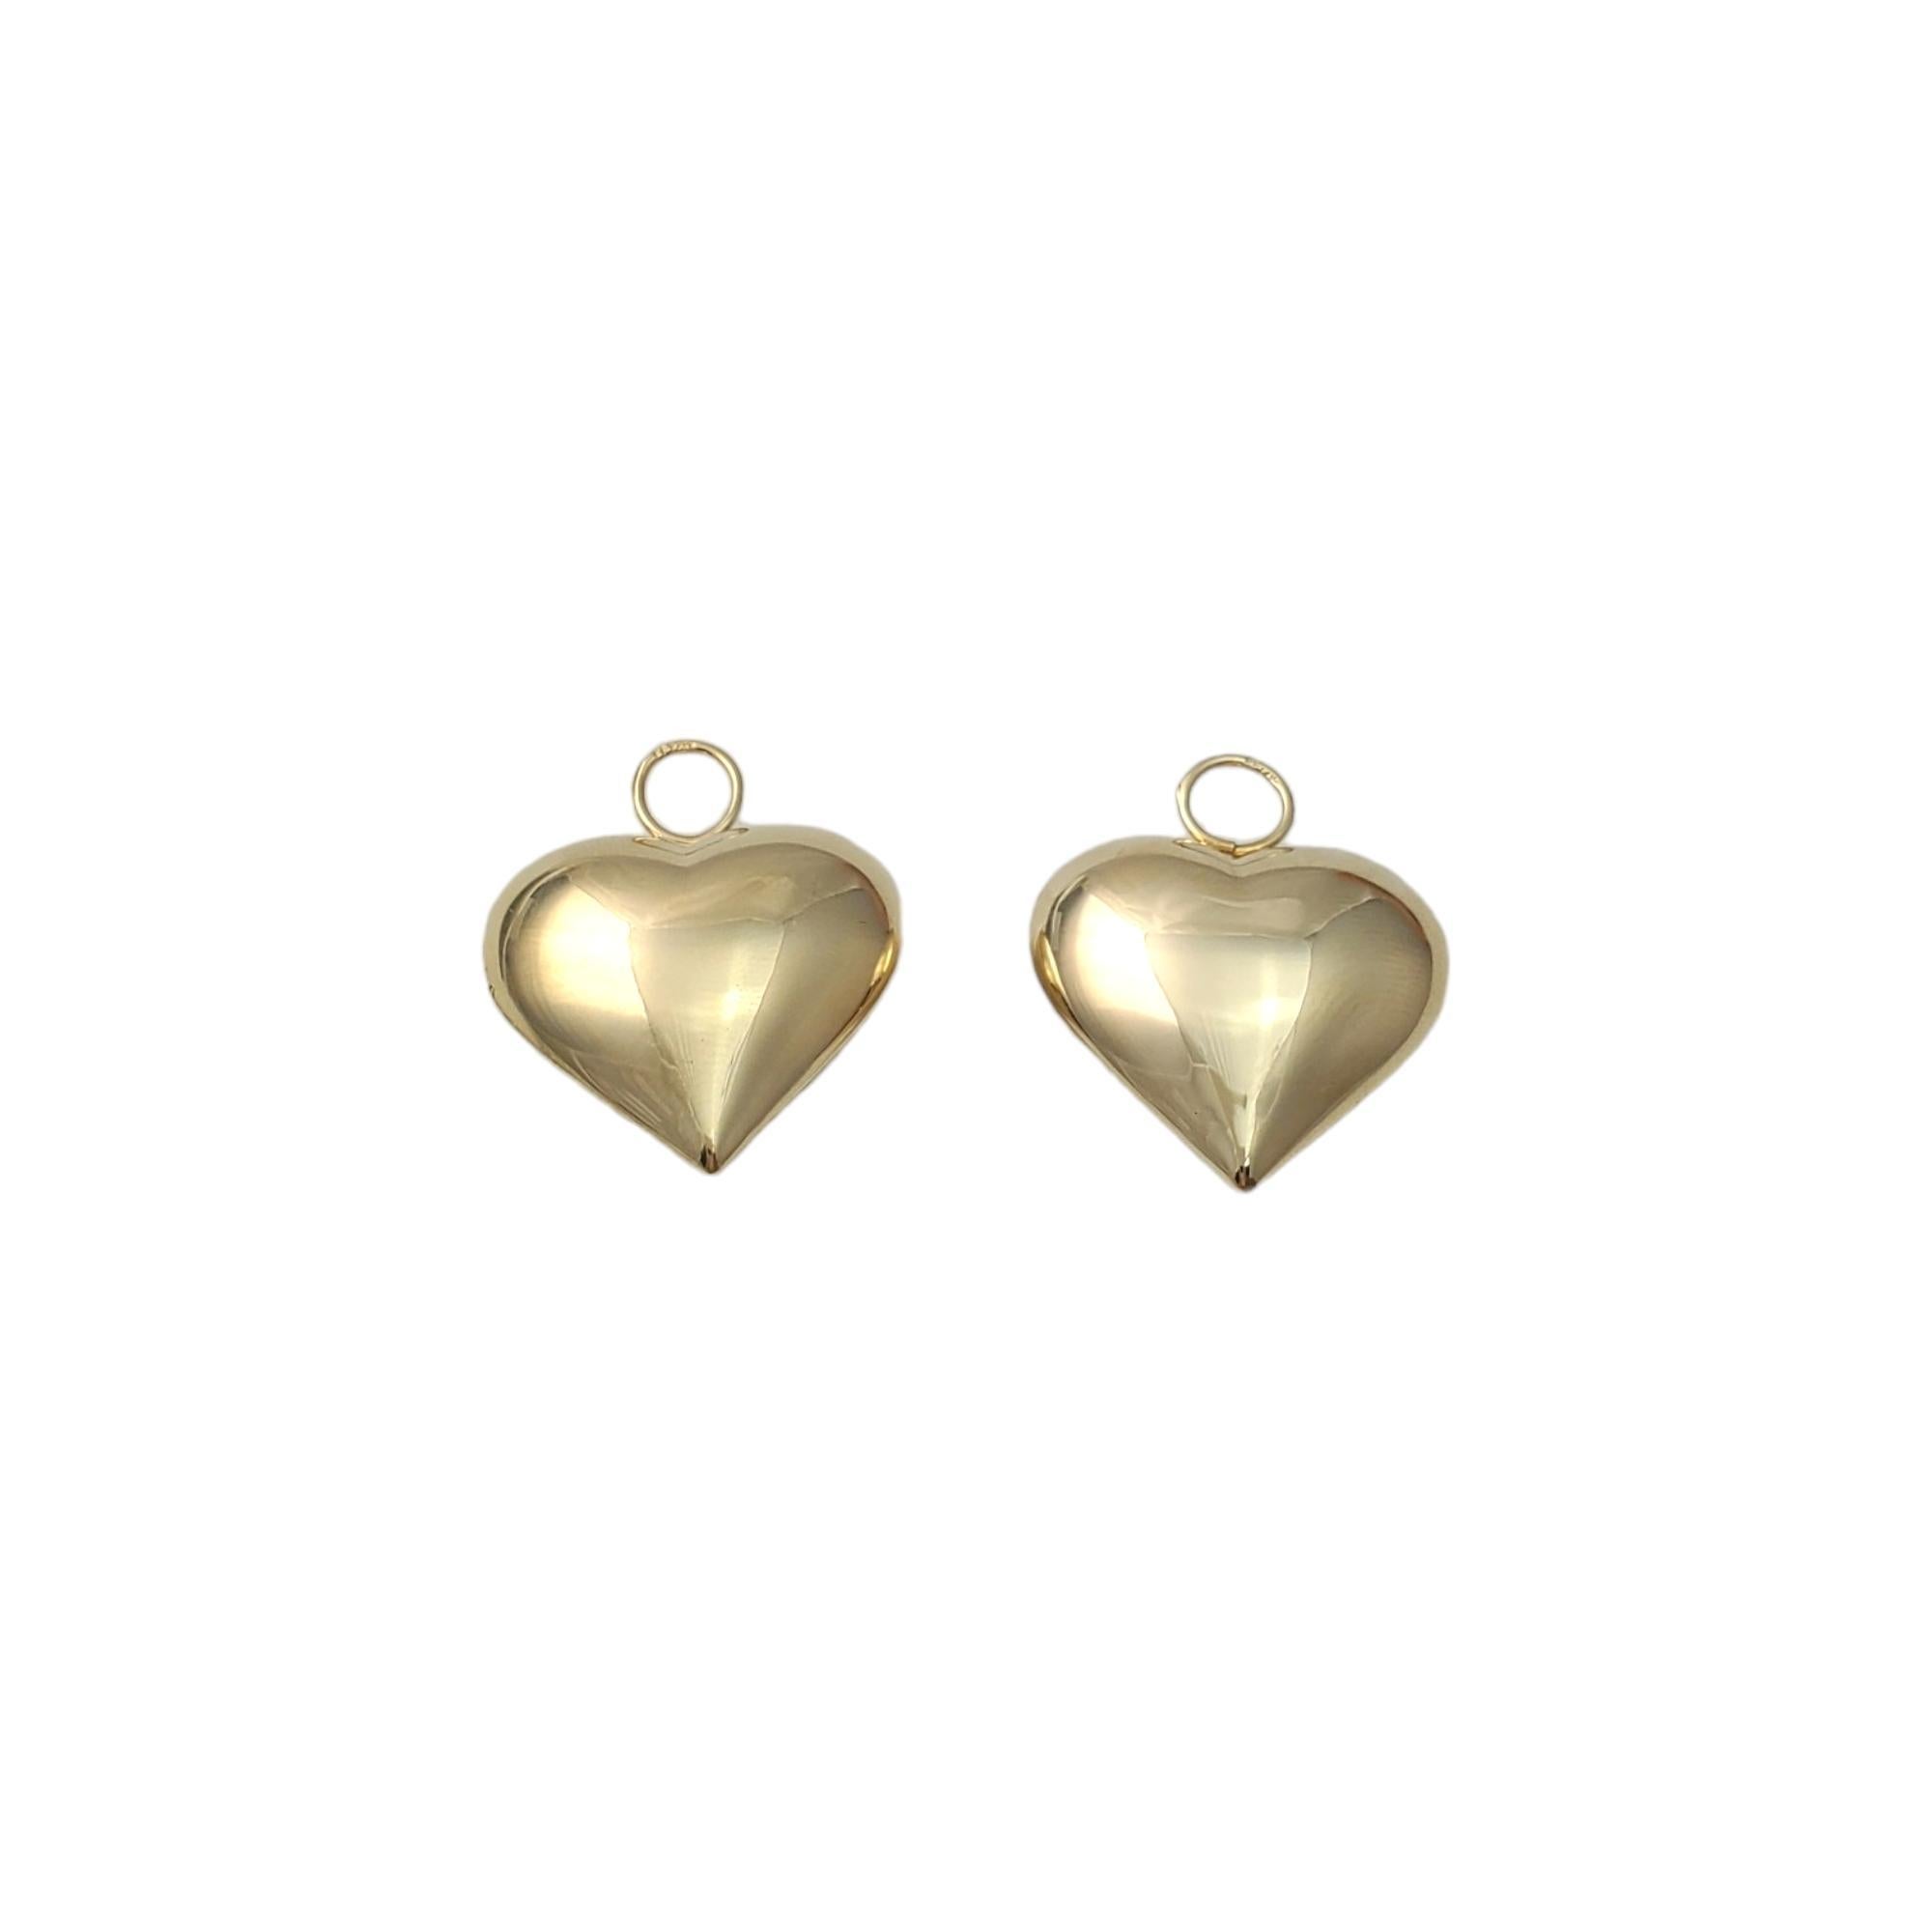 Vintage 14K Yellow Gold Puffy Heart Hoop Accents -

These large hearts are a beautiful addition to any hoops! 

Size:  25.3 mm X 21.1 mm X 9.1 mm

Weight:  1.7 dwt. /  2.9 gr.

Marked: 14K CJ

Very good condition, professionally polished.

Will come